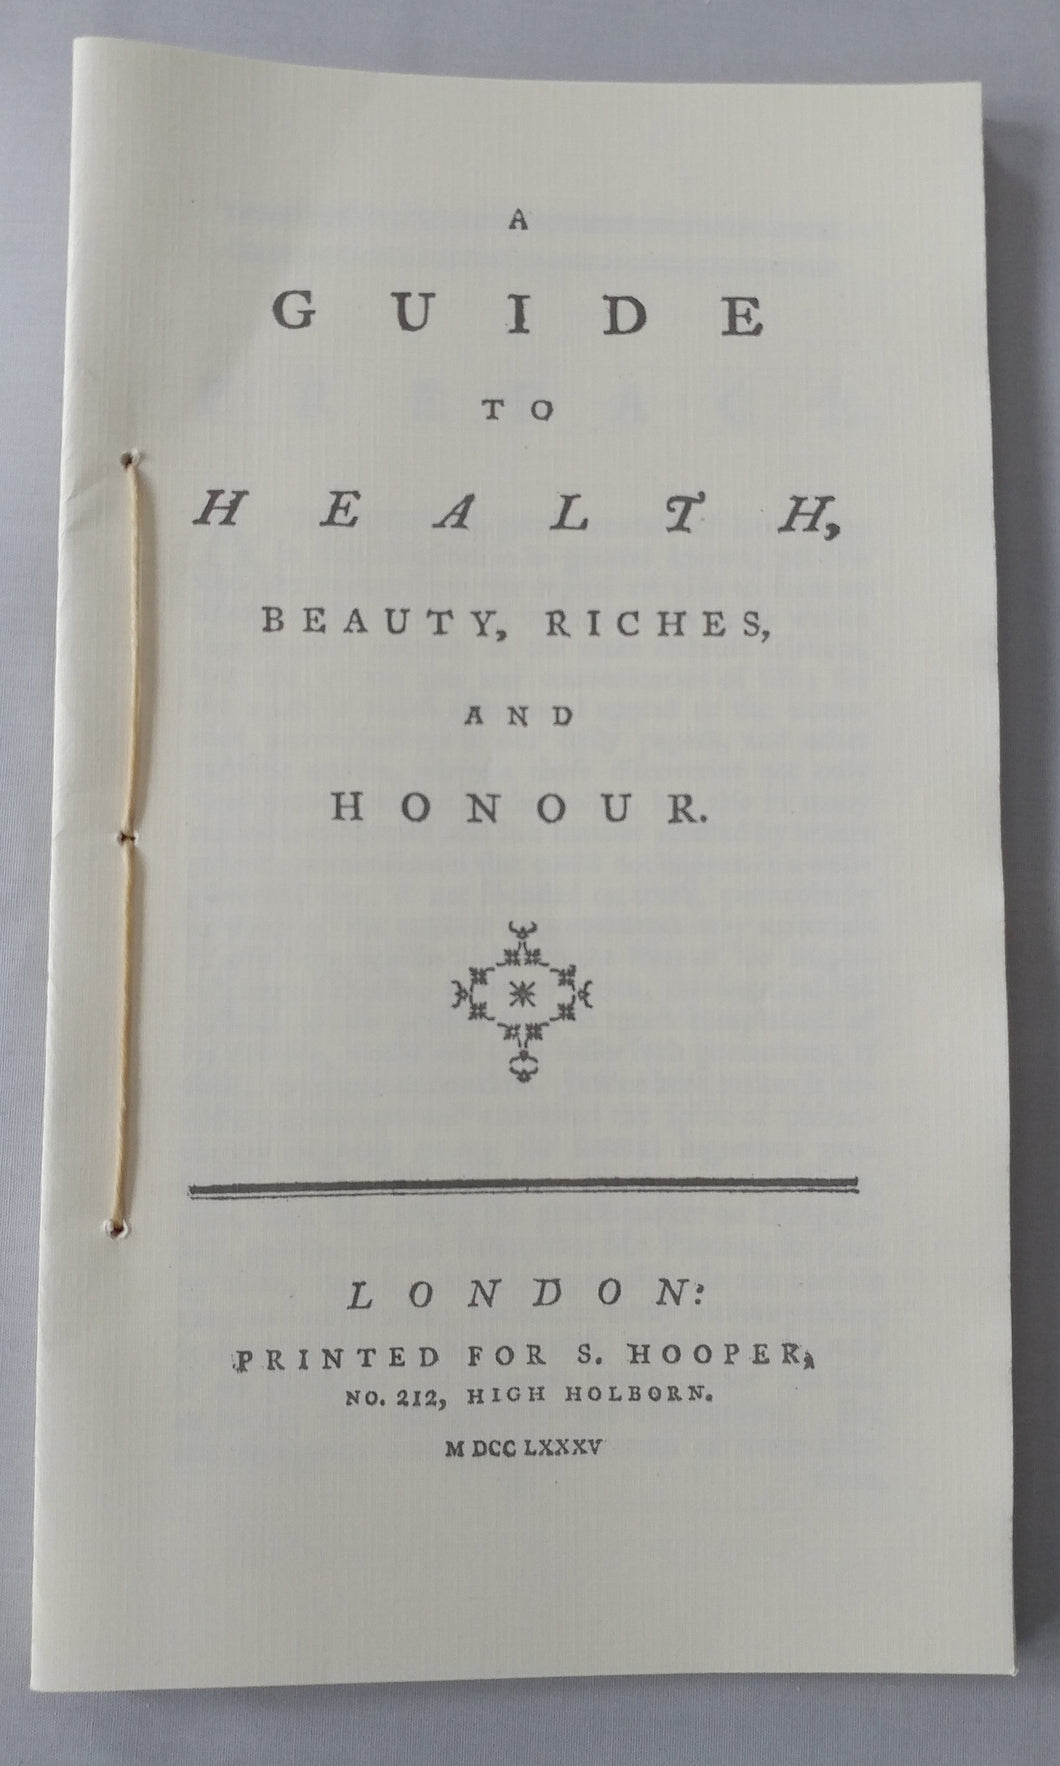 A Guide to Health, Beauty, Riches and Honour